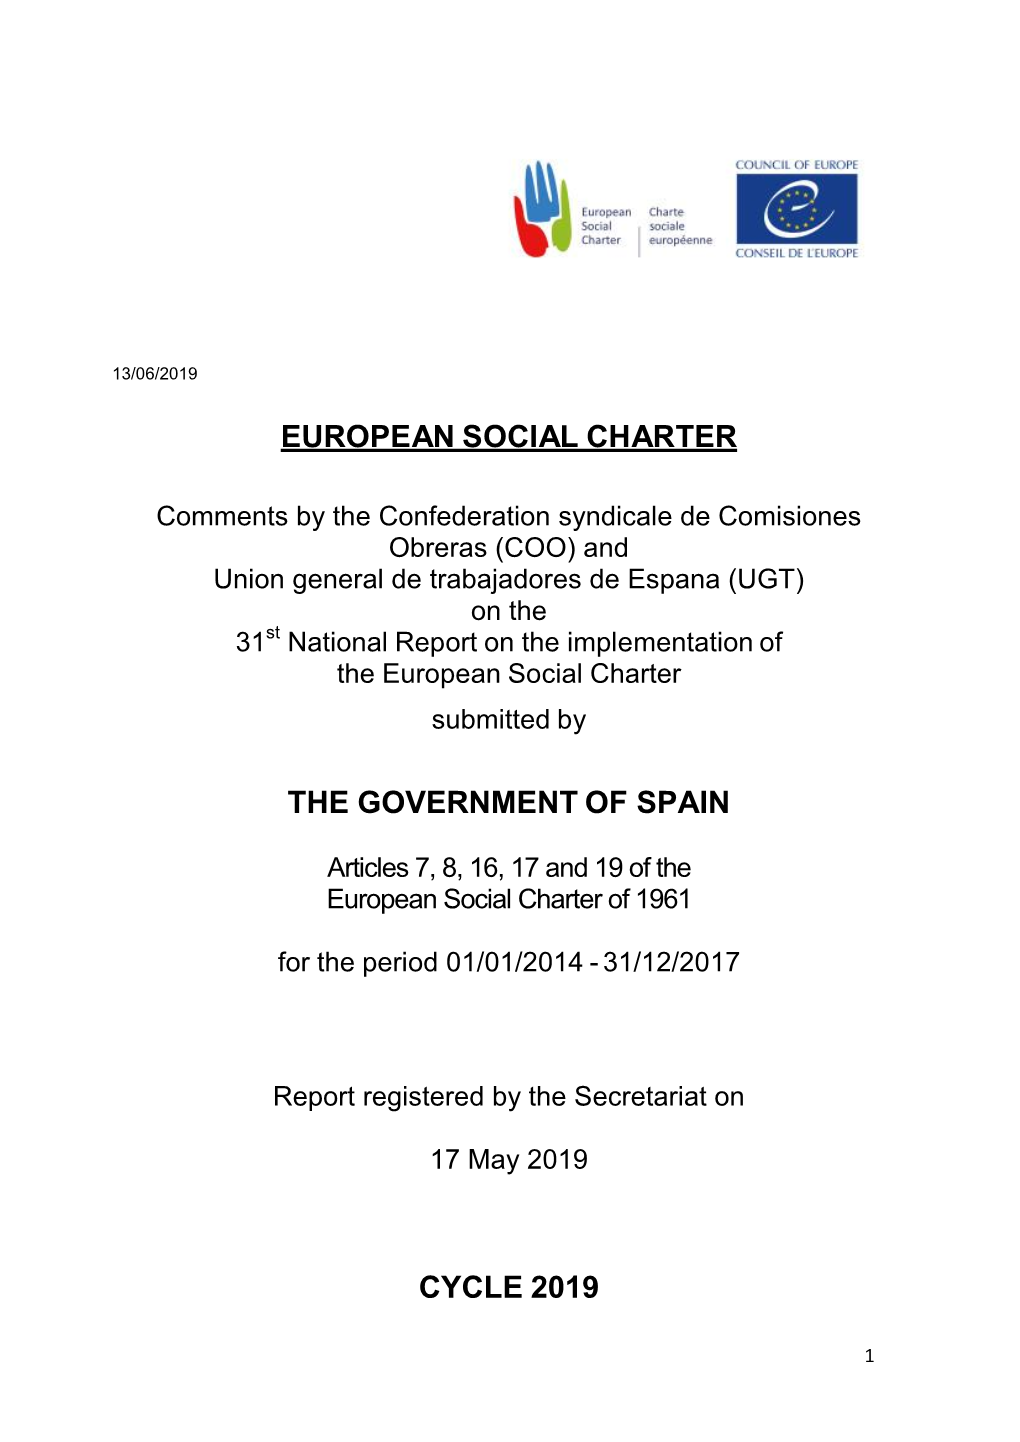 Comments from CCOO and UGT on 31St Report